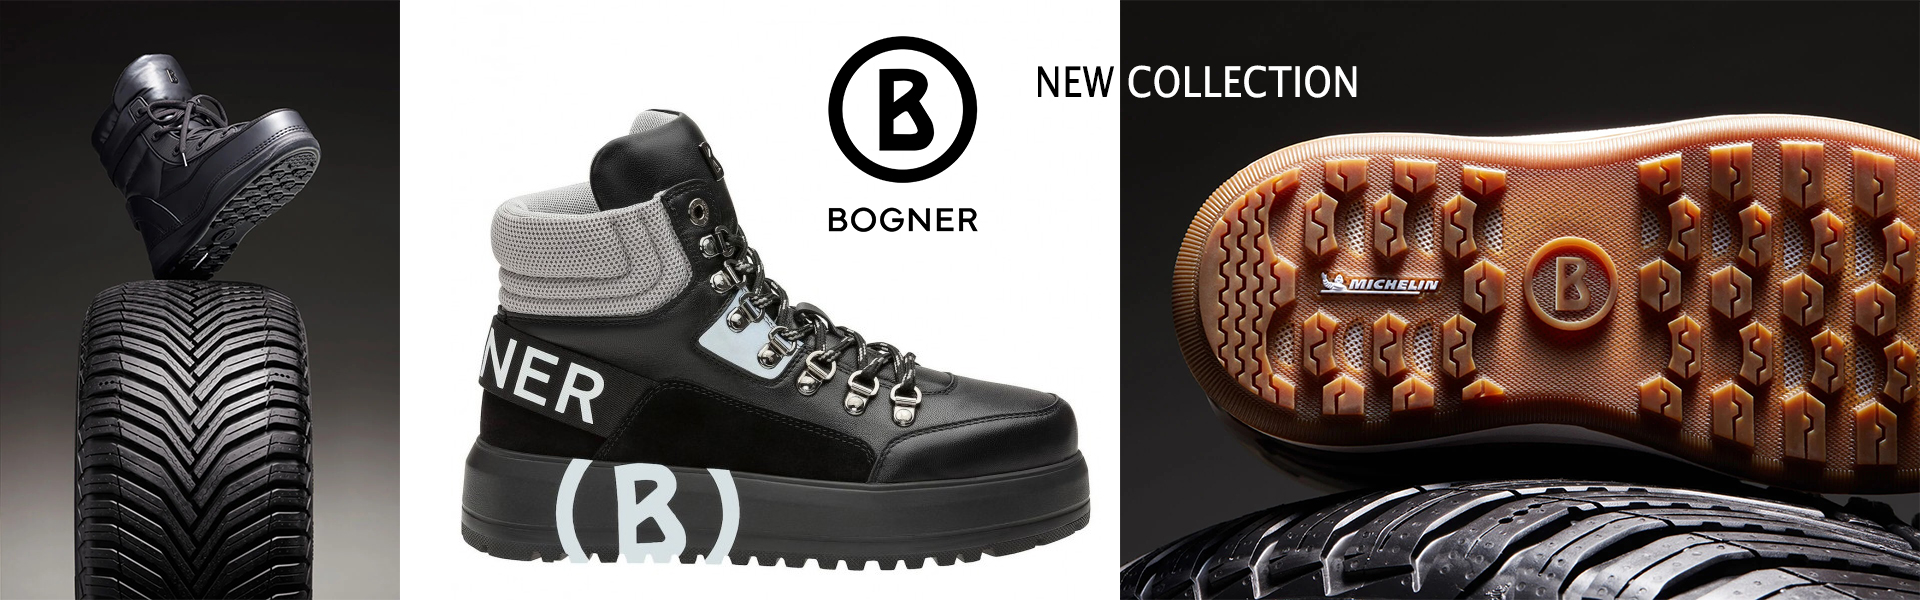 Bogner new collection (shoes)